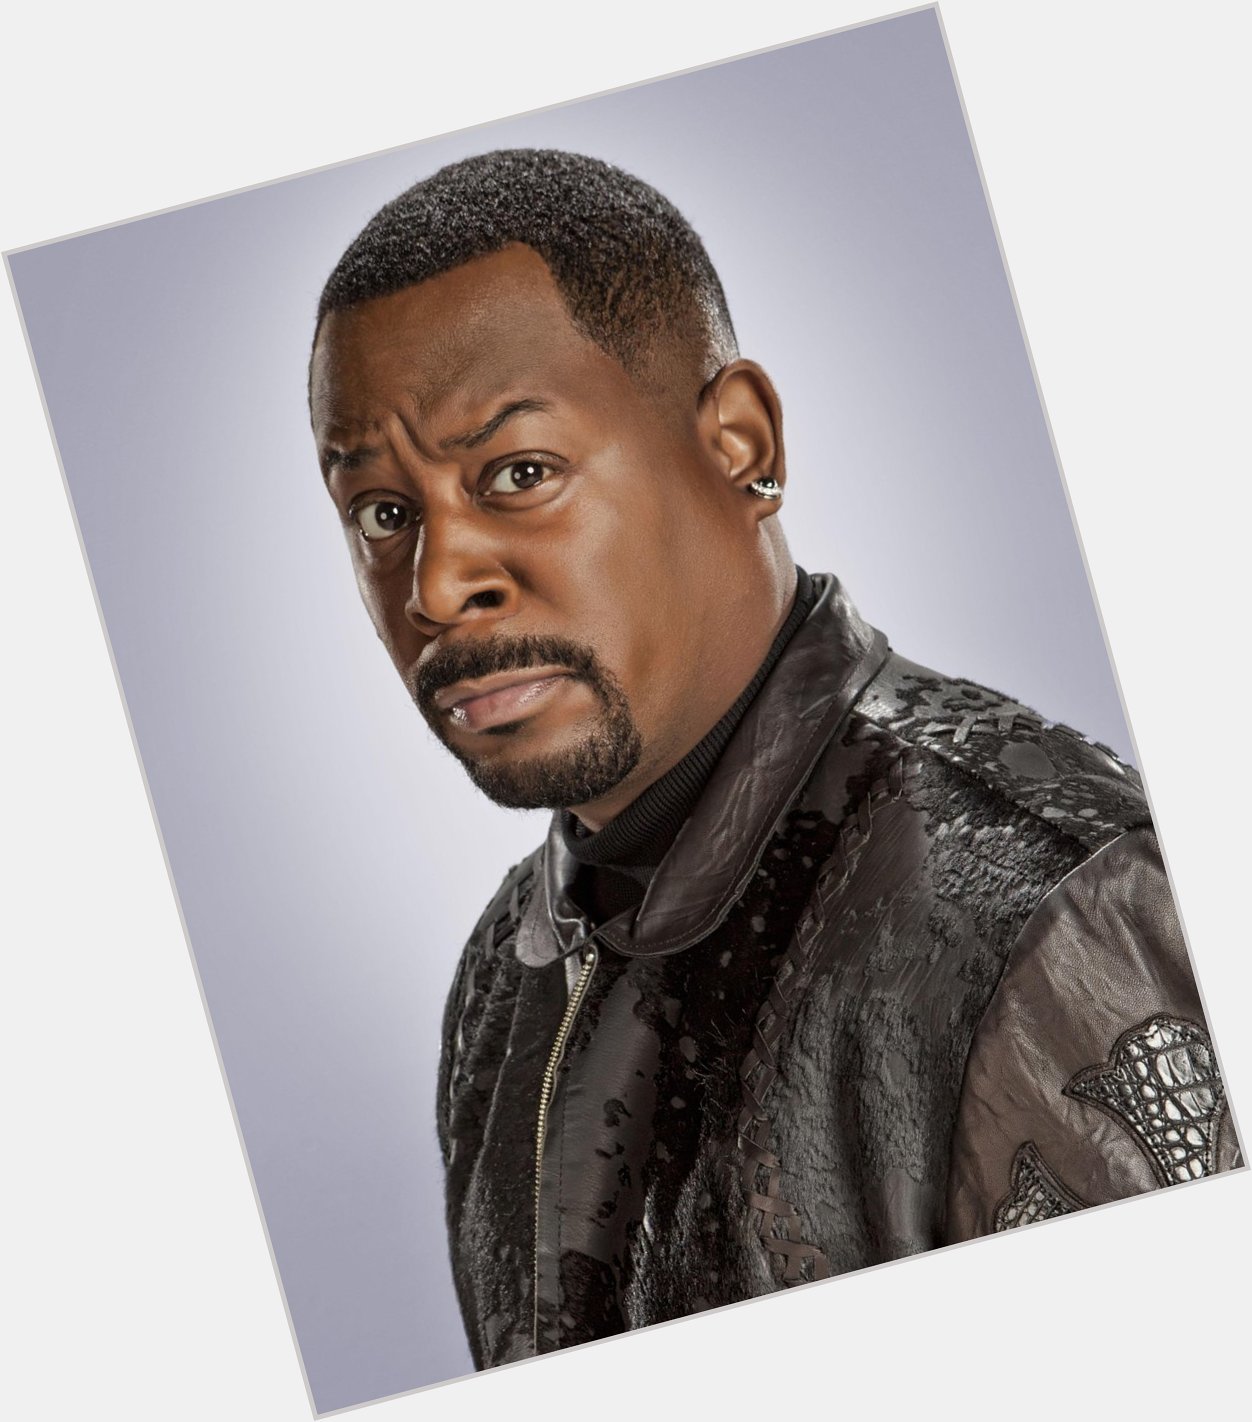 Happy Birthday to Martin Lawrence, who turns 50 today! 